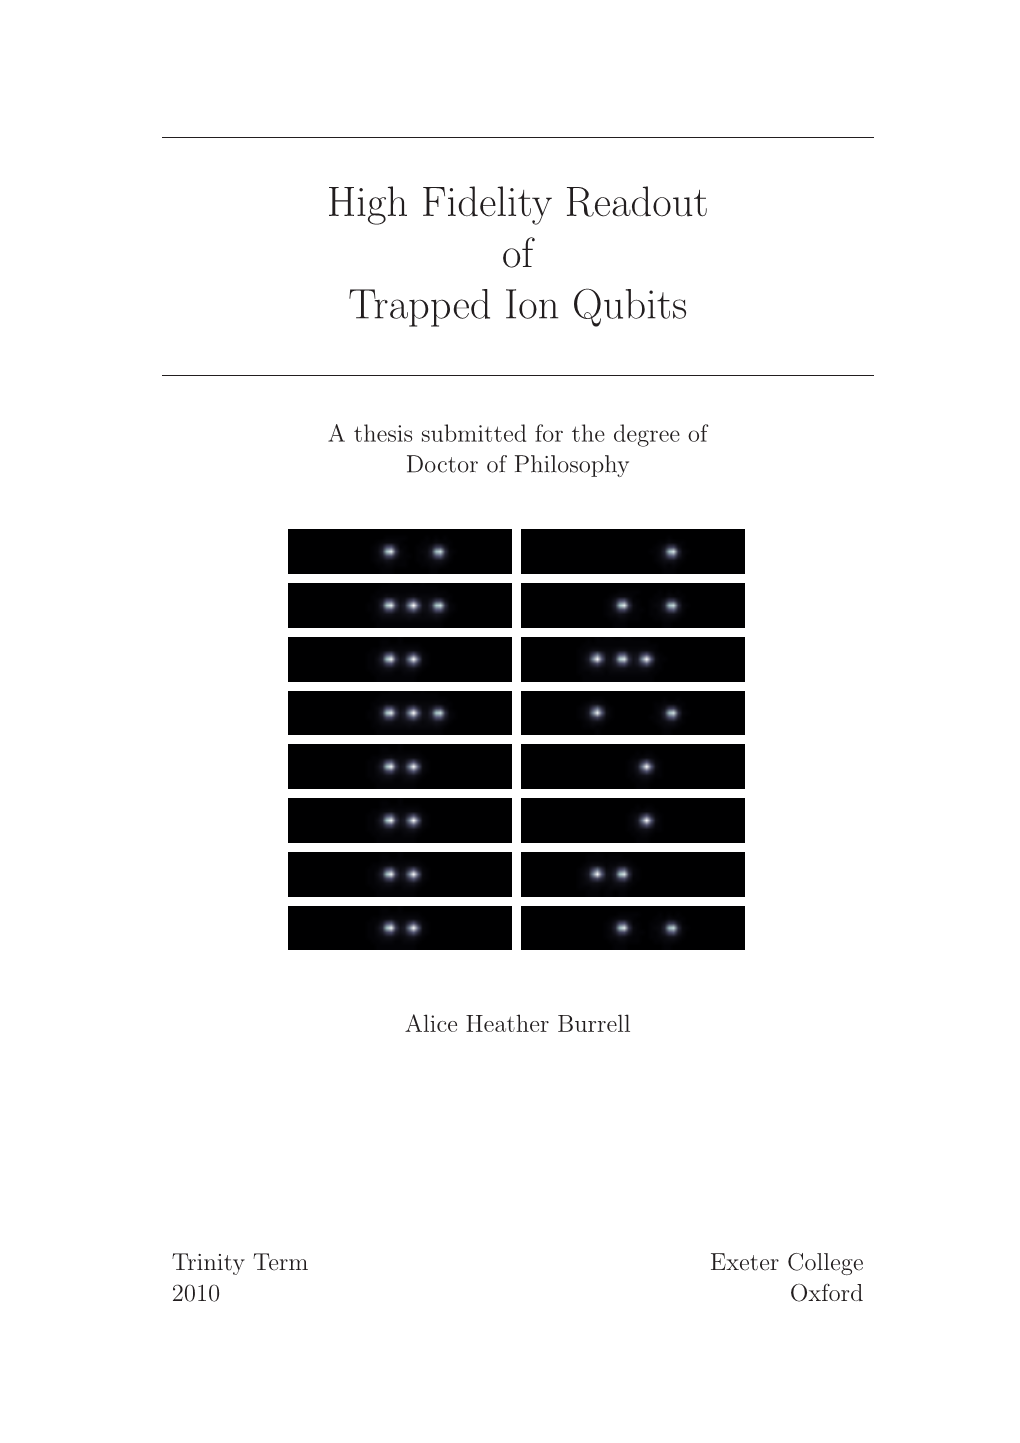 High Fidelity Readout of Trapped Ion Qubits